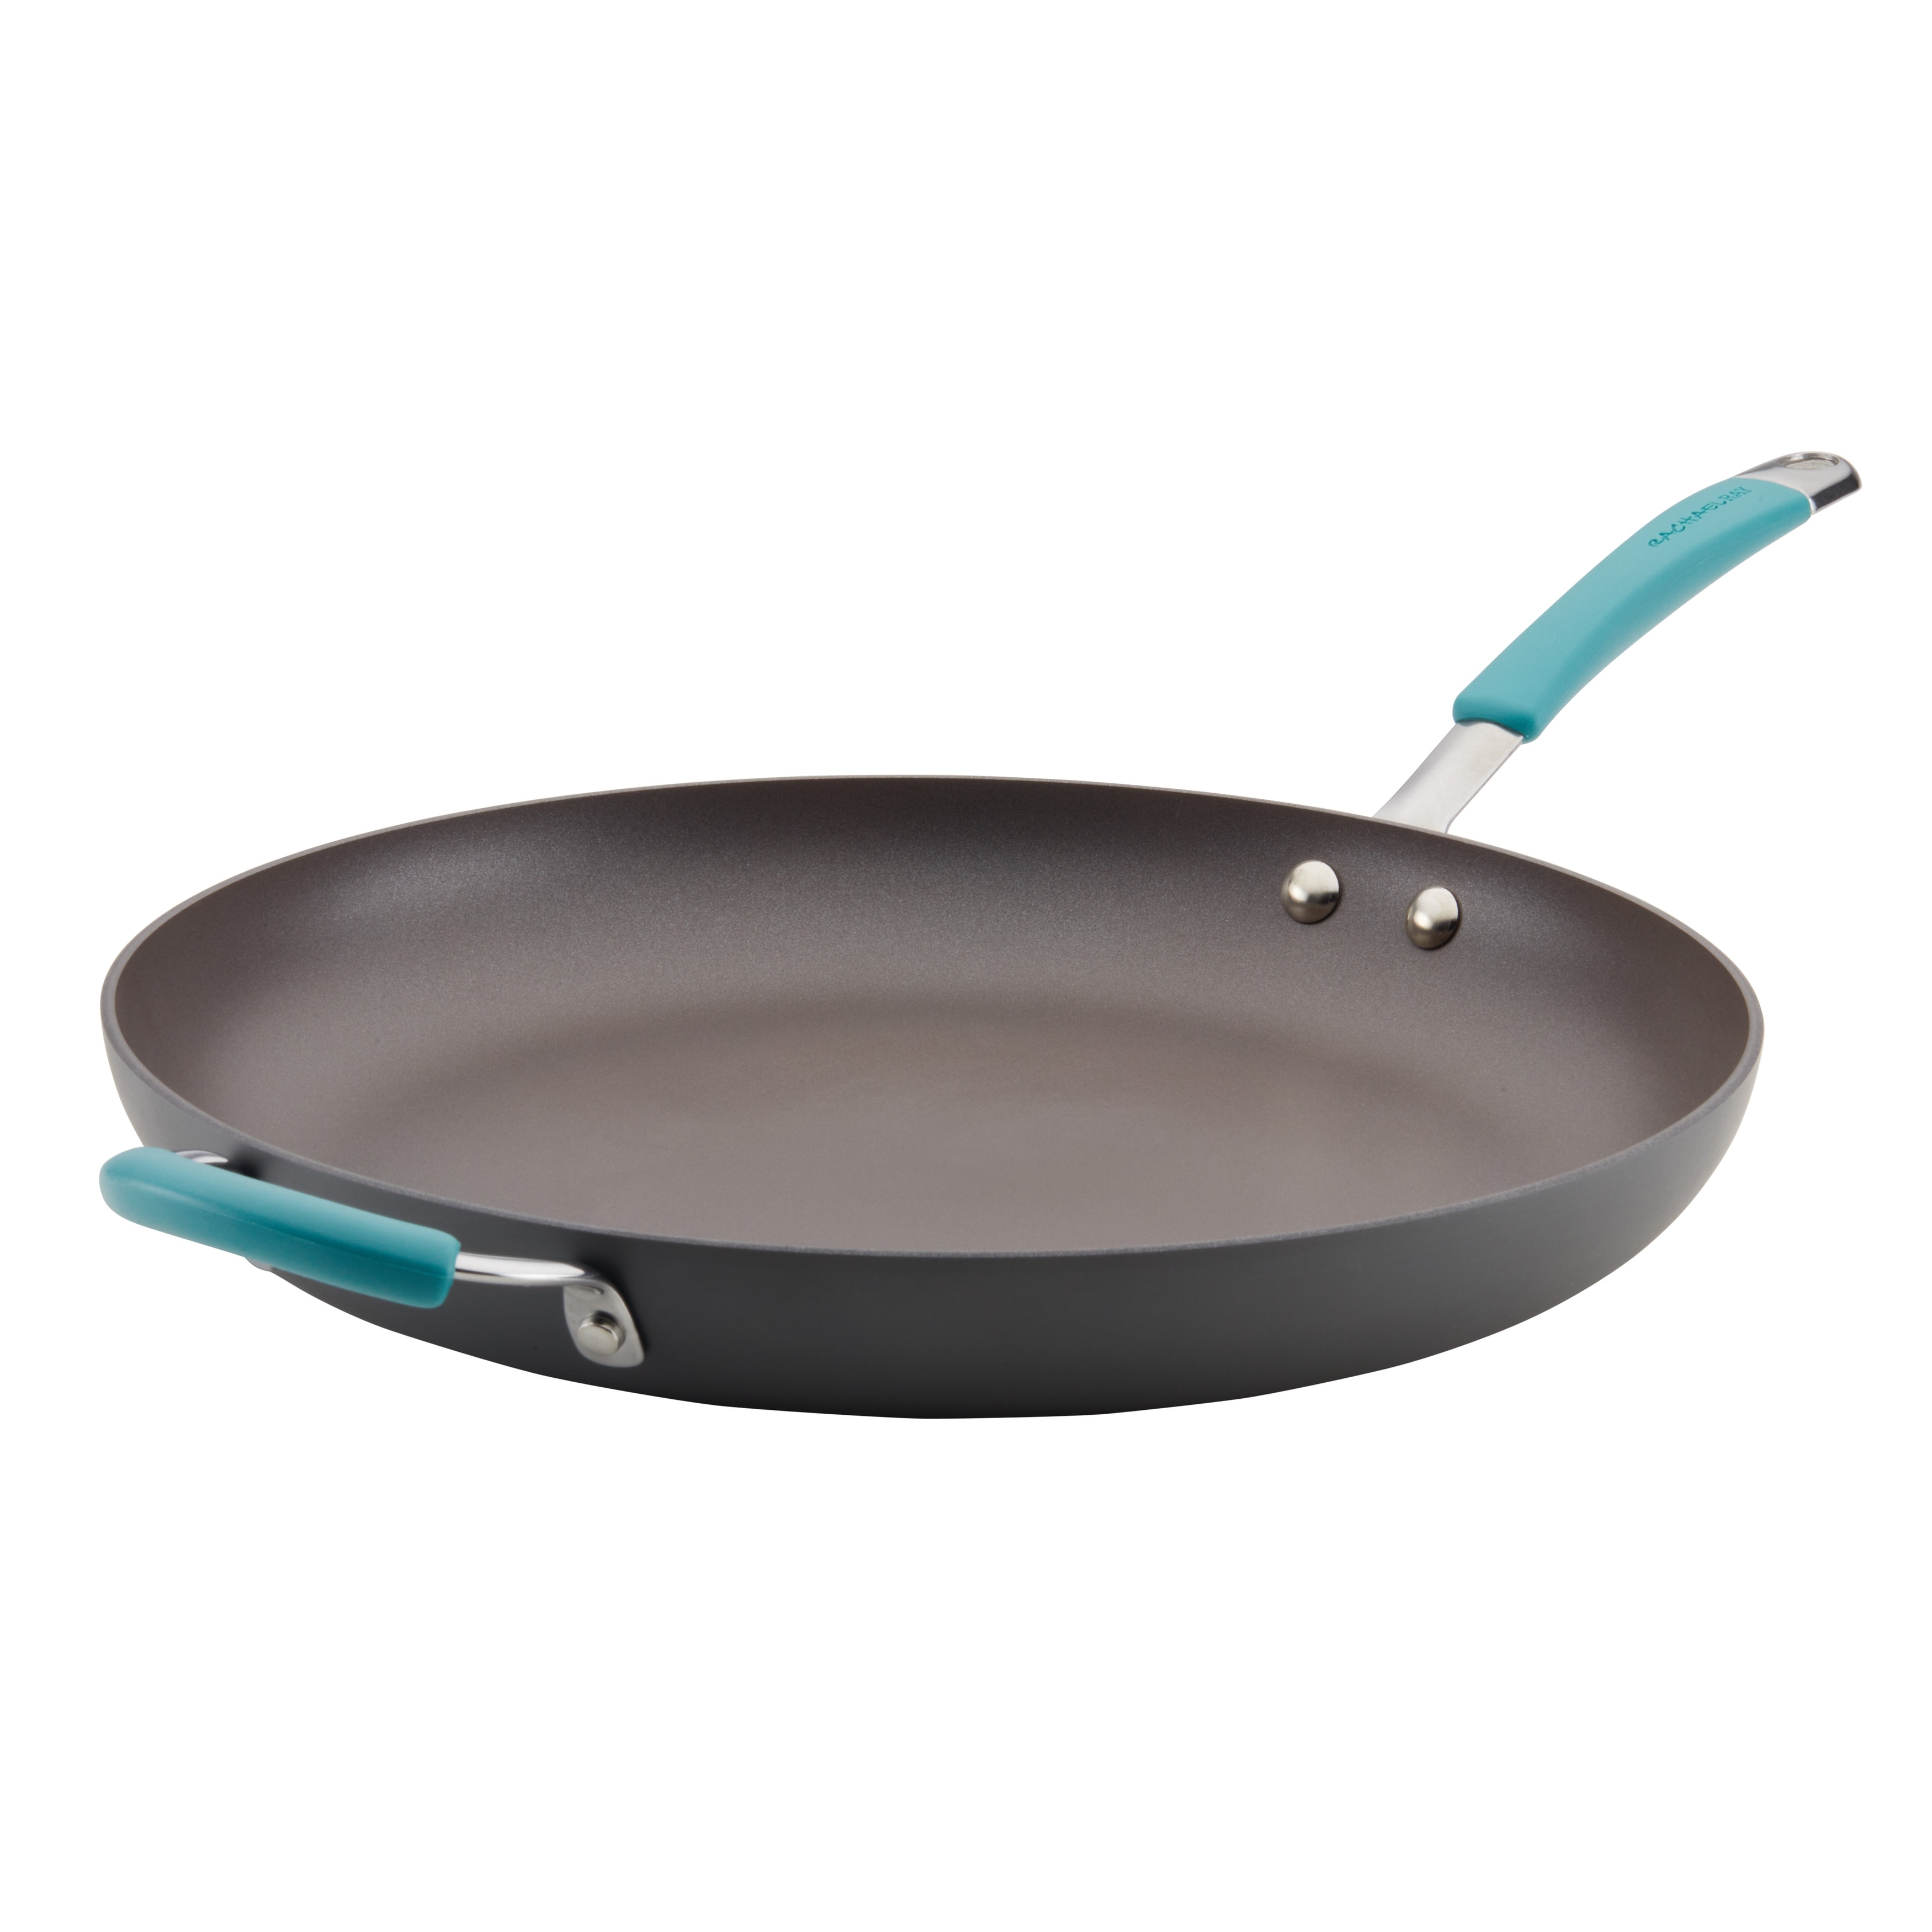 https://ak1.ostkcdn.com/images/products/is/images/direct/0b5fef23e5da29e254b7802a01ff5c46df02441a/Rachael-Ray-Cucina-Hard-Anodized-Nonstick-Frying-Pan-with-Helper-Handle%2C-14-Inch%2C-Gray-Agave-Blue.jpg